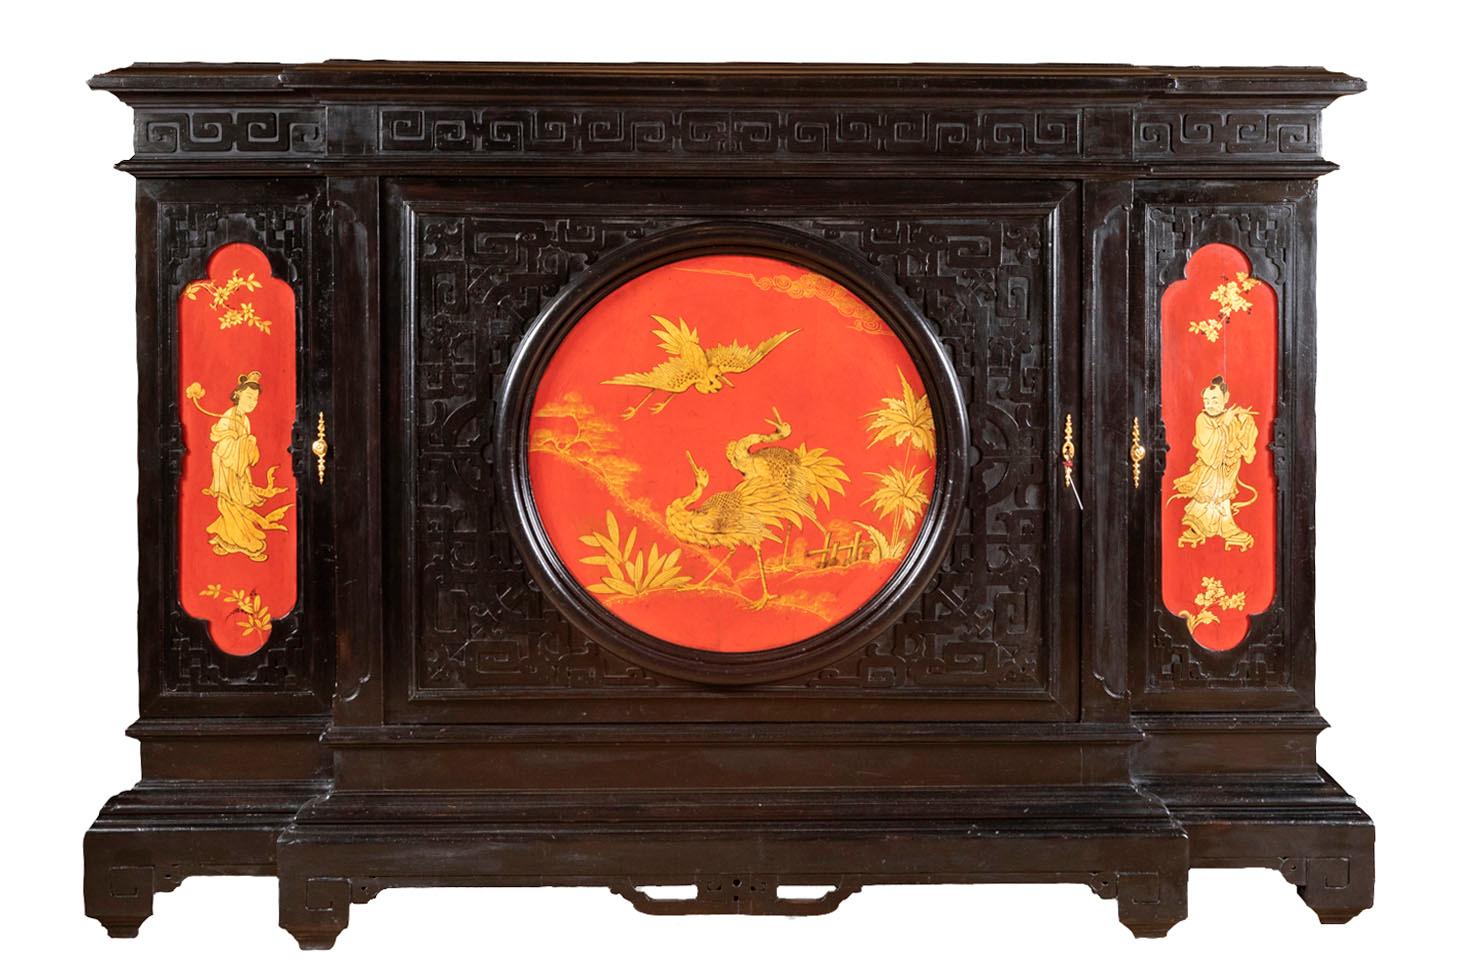 Large cabinet opening by three door leaves in black lacquered wood with a red lacquered decor and gilt highlights. Rectangular body in carved and black lacquered wood with a decor of Greek meanders frieze on the entablature and geometrical motifs on